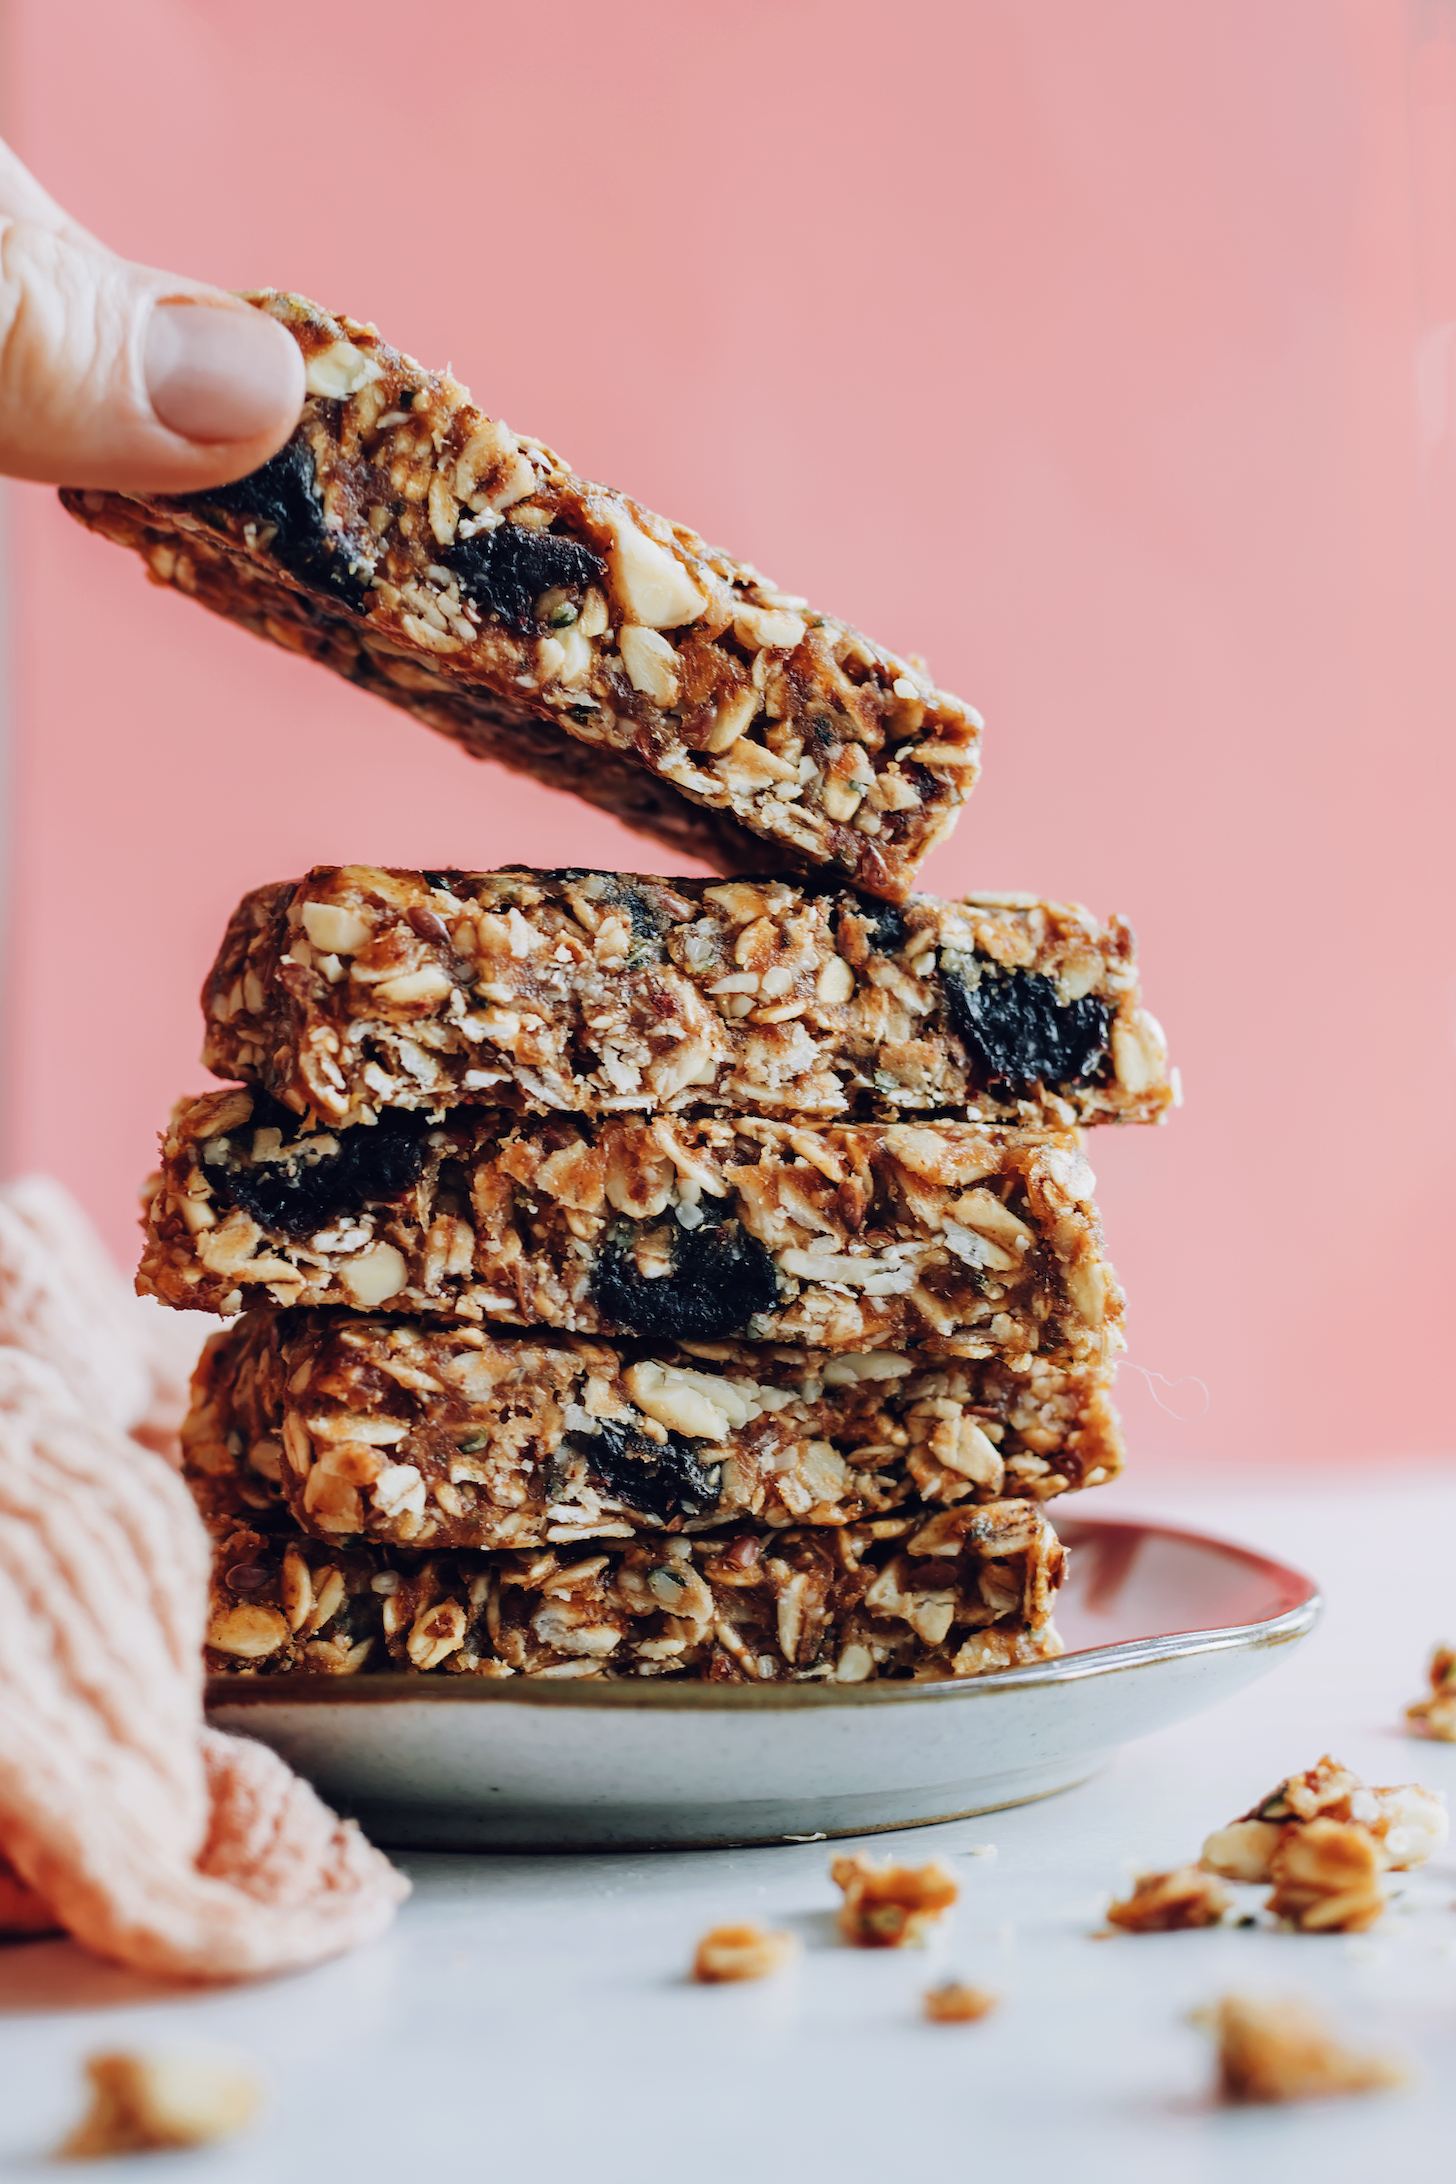 Picking up a healthy homemade granola bar from a plate